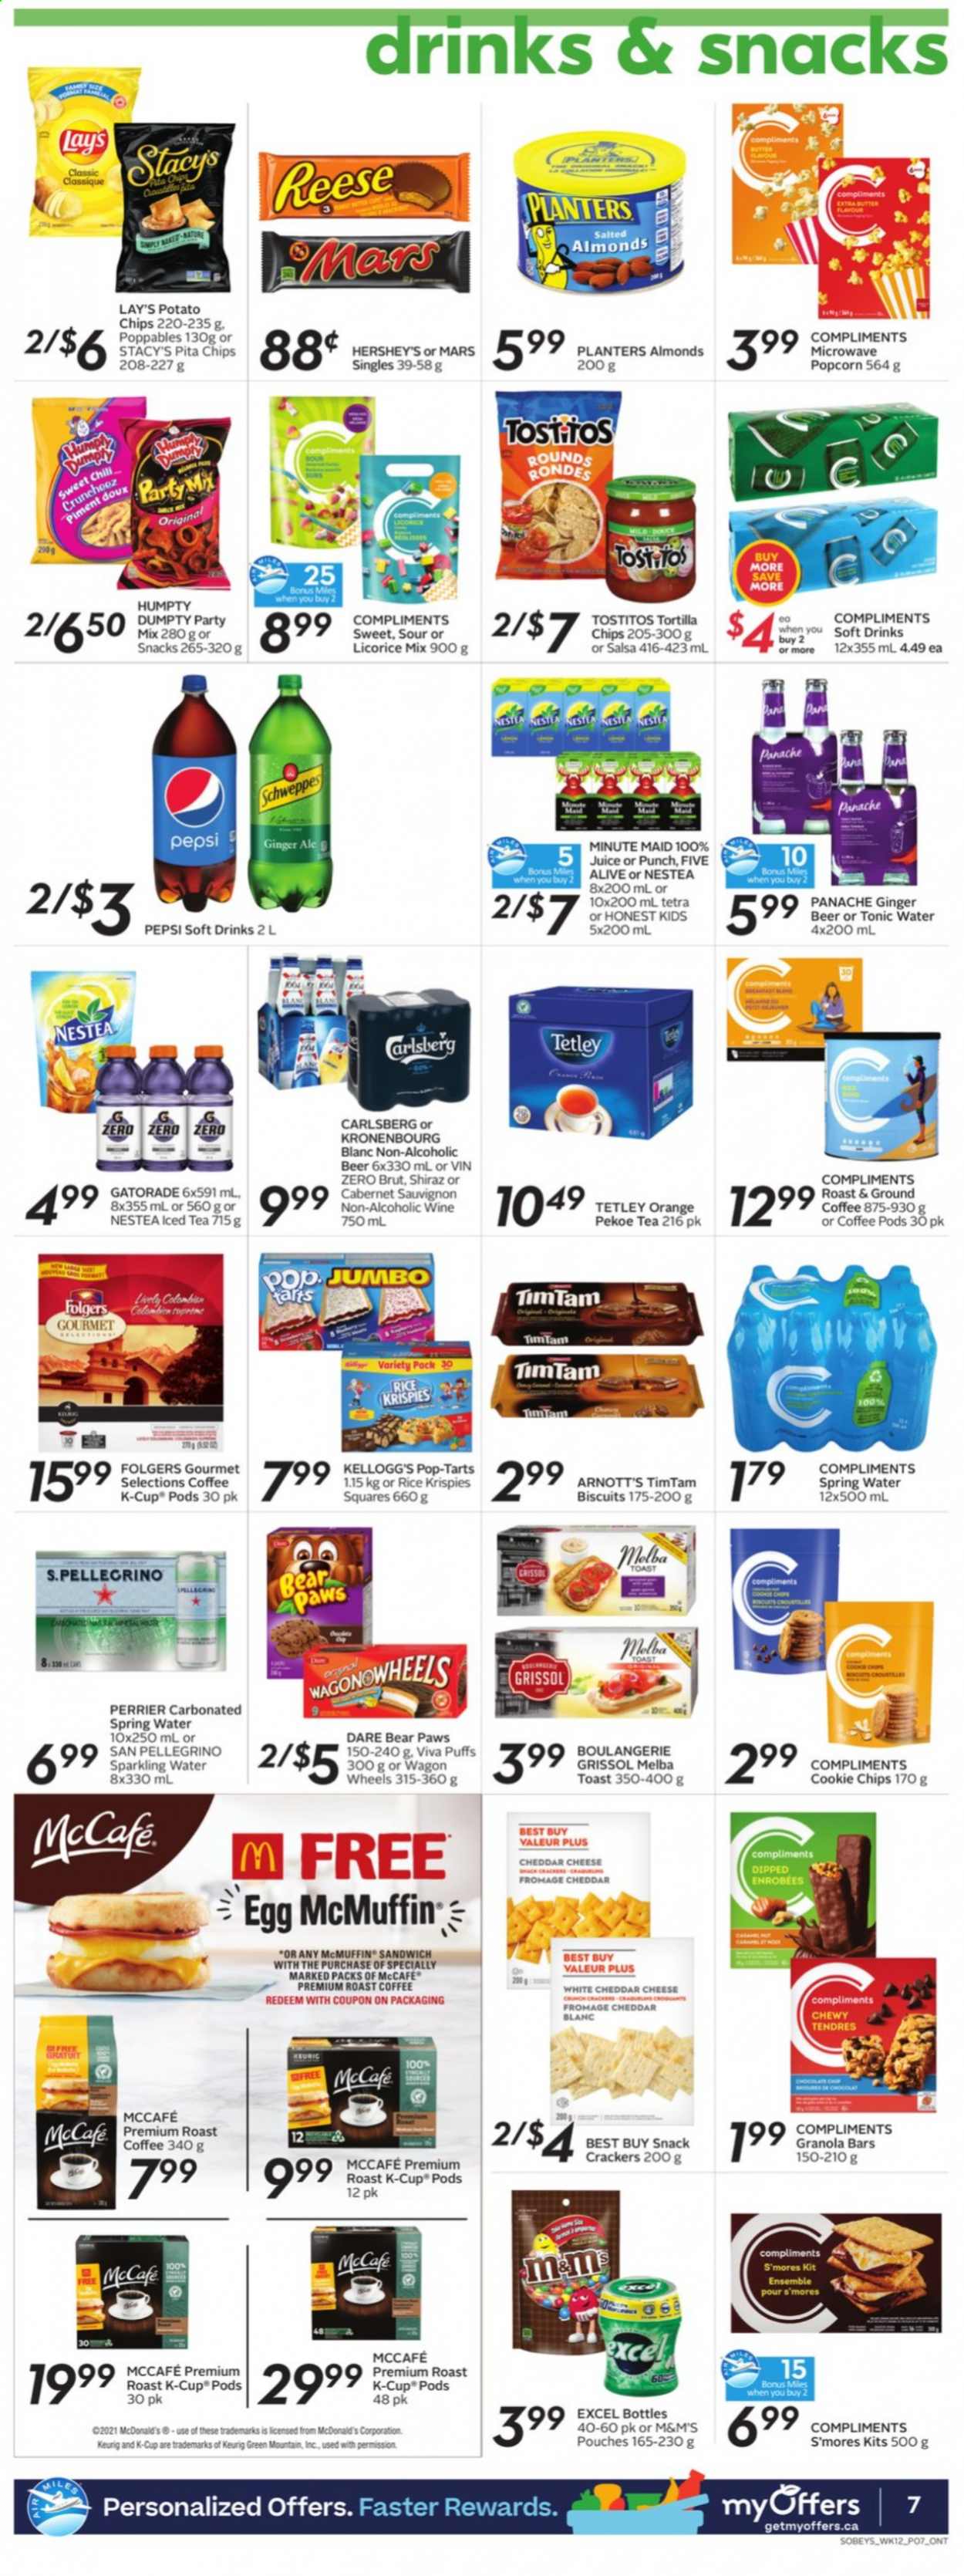 thumbnail - Sobeys Flyer - July 15, 2021 - July 21, 2021 - Sales products - puffs, sandwich, cheese, eggs, butter, Hershey's, Mars, crackers, Kellogg's, biscuit, Pop-Tarts, tortilla chips, Lay’s, popcorn, Tostitos, pita chips, granola bar, Rice Krispies, salsa, almonds, Planters, ginger ale, Schweppes, Pepsi, juice, ice tea, tonic, soft drink, Perrier, Gatorade, fruit punch, spring water, sparkling water, San Pellegrino, coffee pods, Folgers, ground coffee, coffee capsules, McCafe, K-Cups, Keurig, Green Mountain, Cabernet Sauvignon, red wine, wine, Shiraz, beer, ginger beer, Carlsberg, Brut, Paws, chips, M&M's. Page 7.